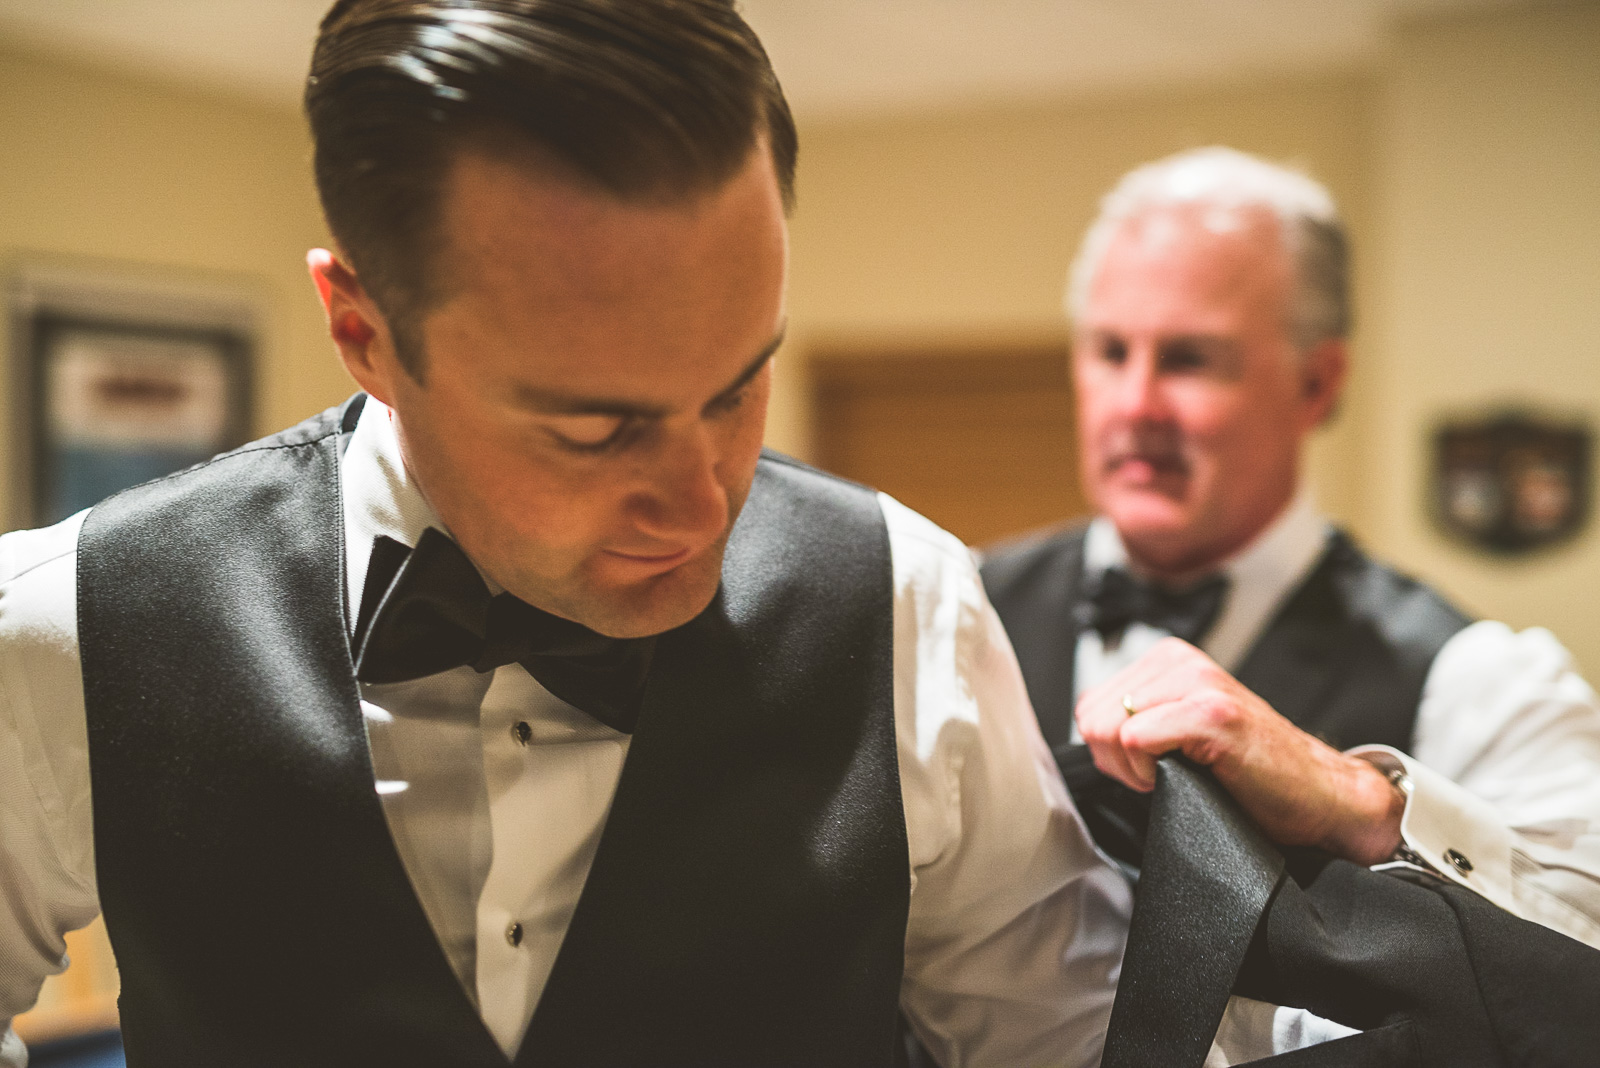 06 groom and dad - Kristina + Dave // Wedding Photographer in Chicago